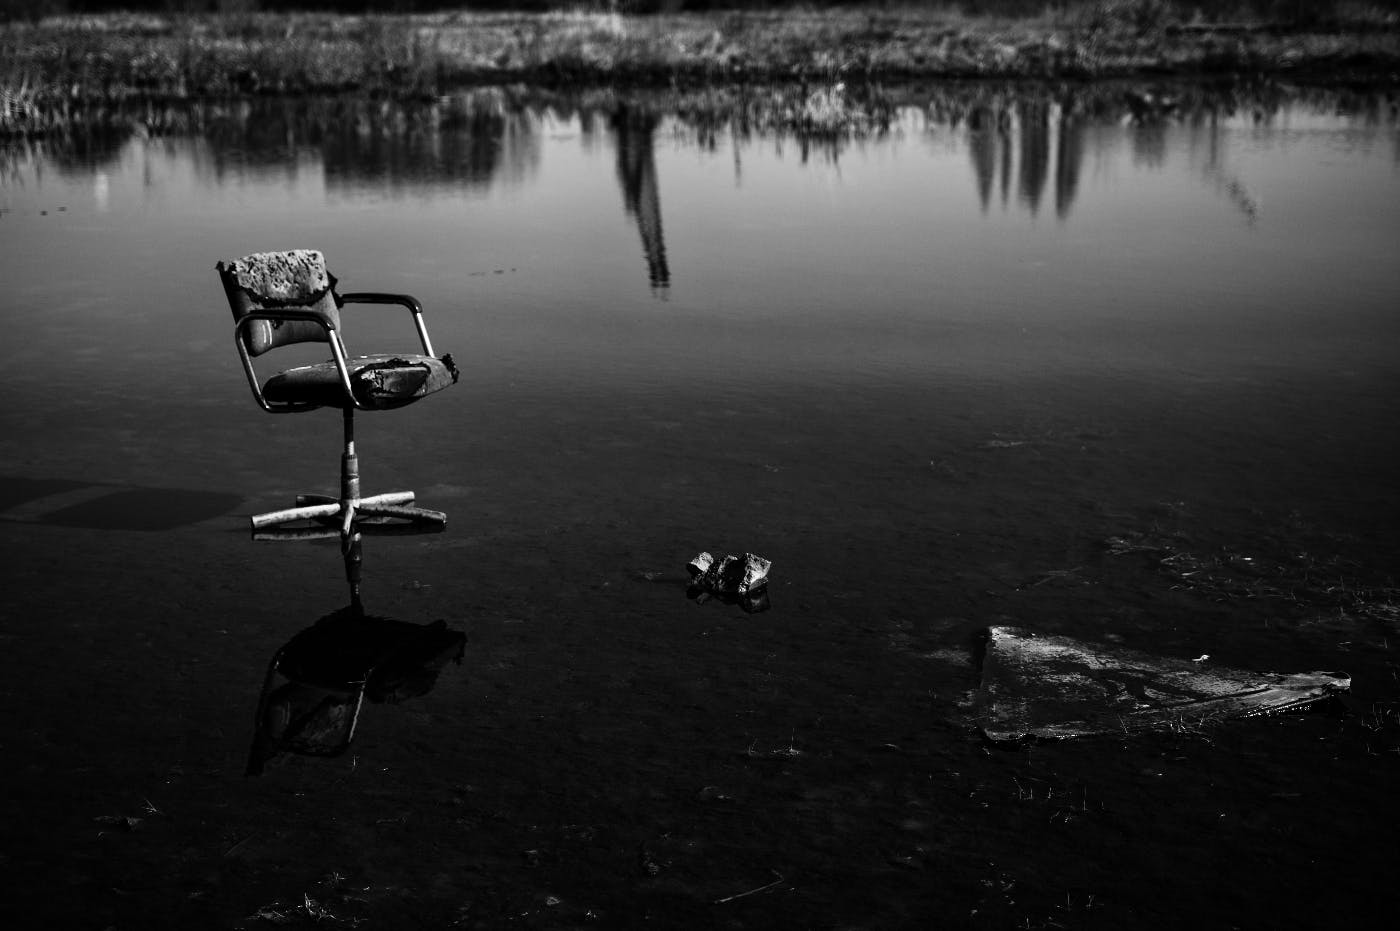 A black and white image of a decrepit swivel chair on a iced pond